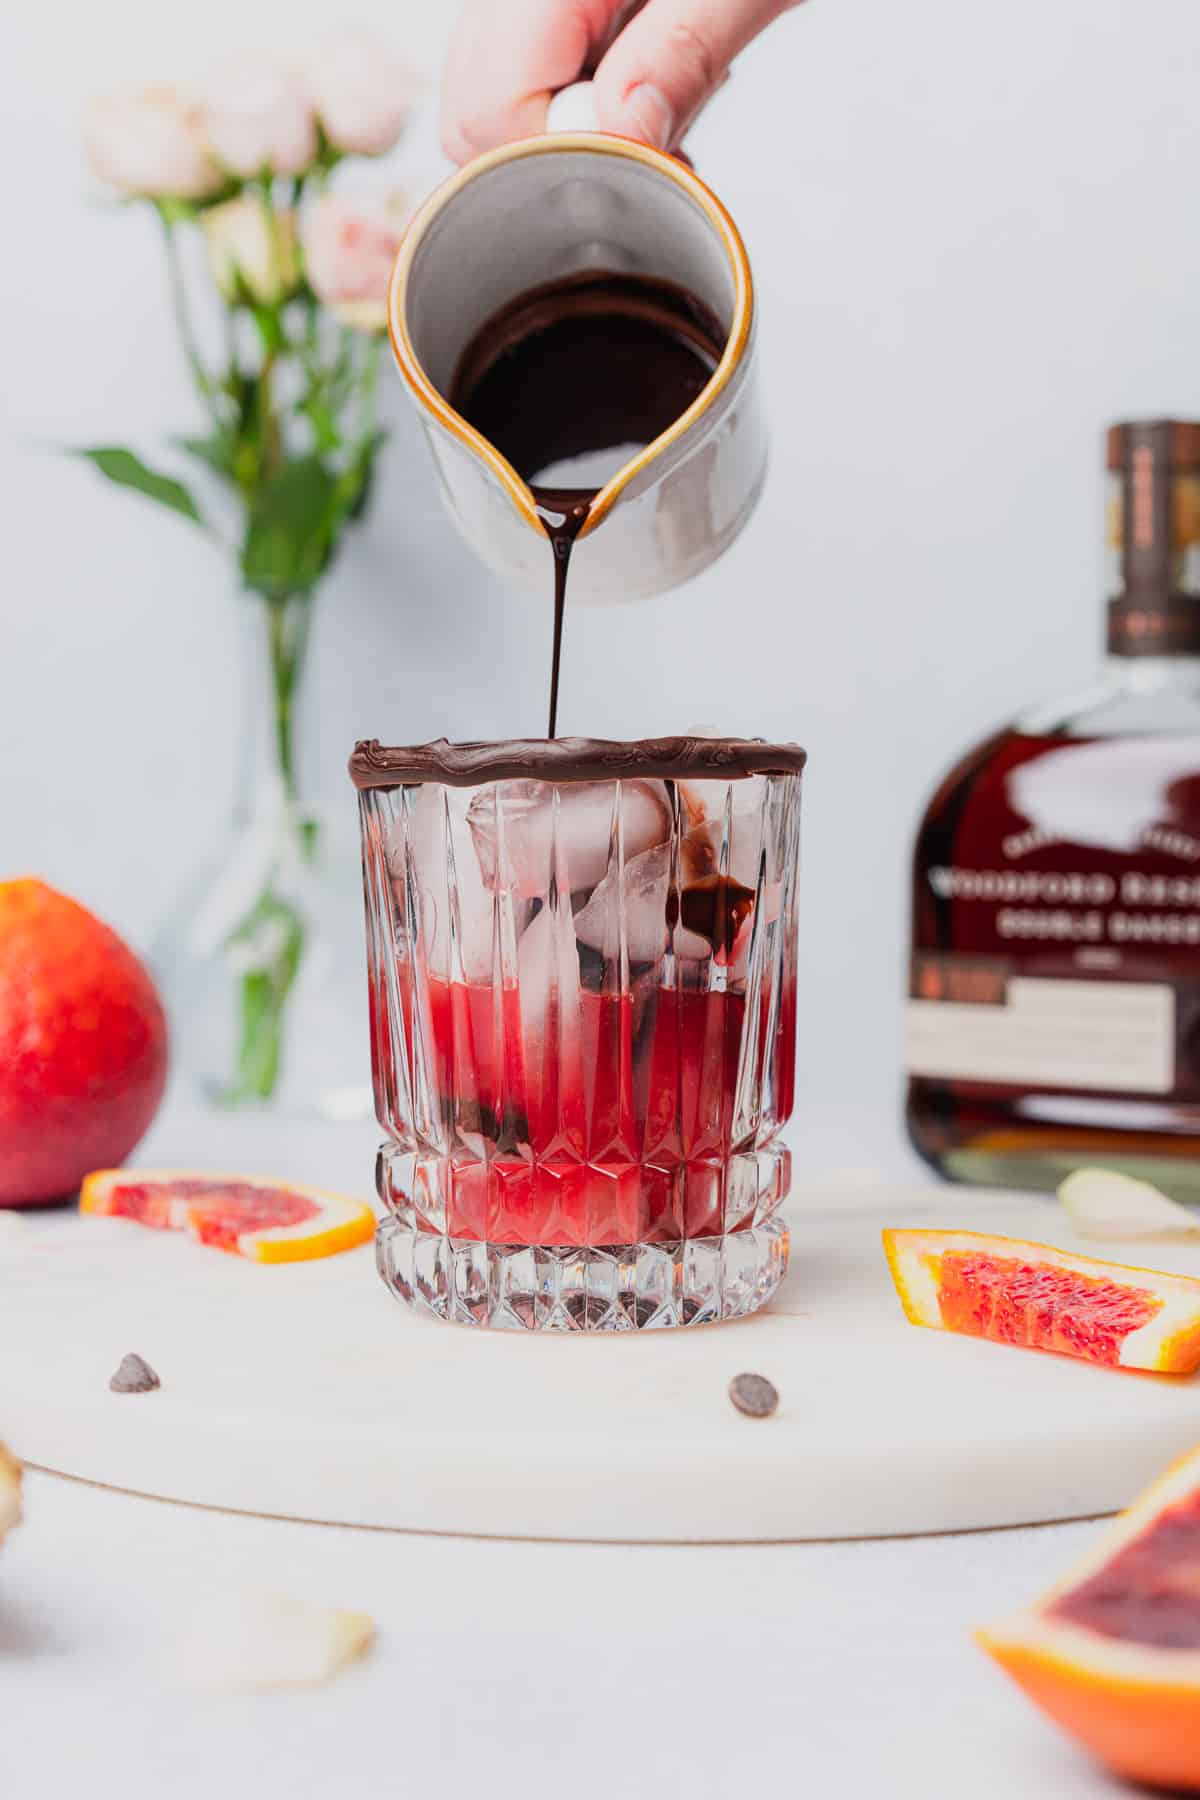 pouring in chocolate simple syrup to a glass full of blood orange juice 